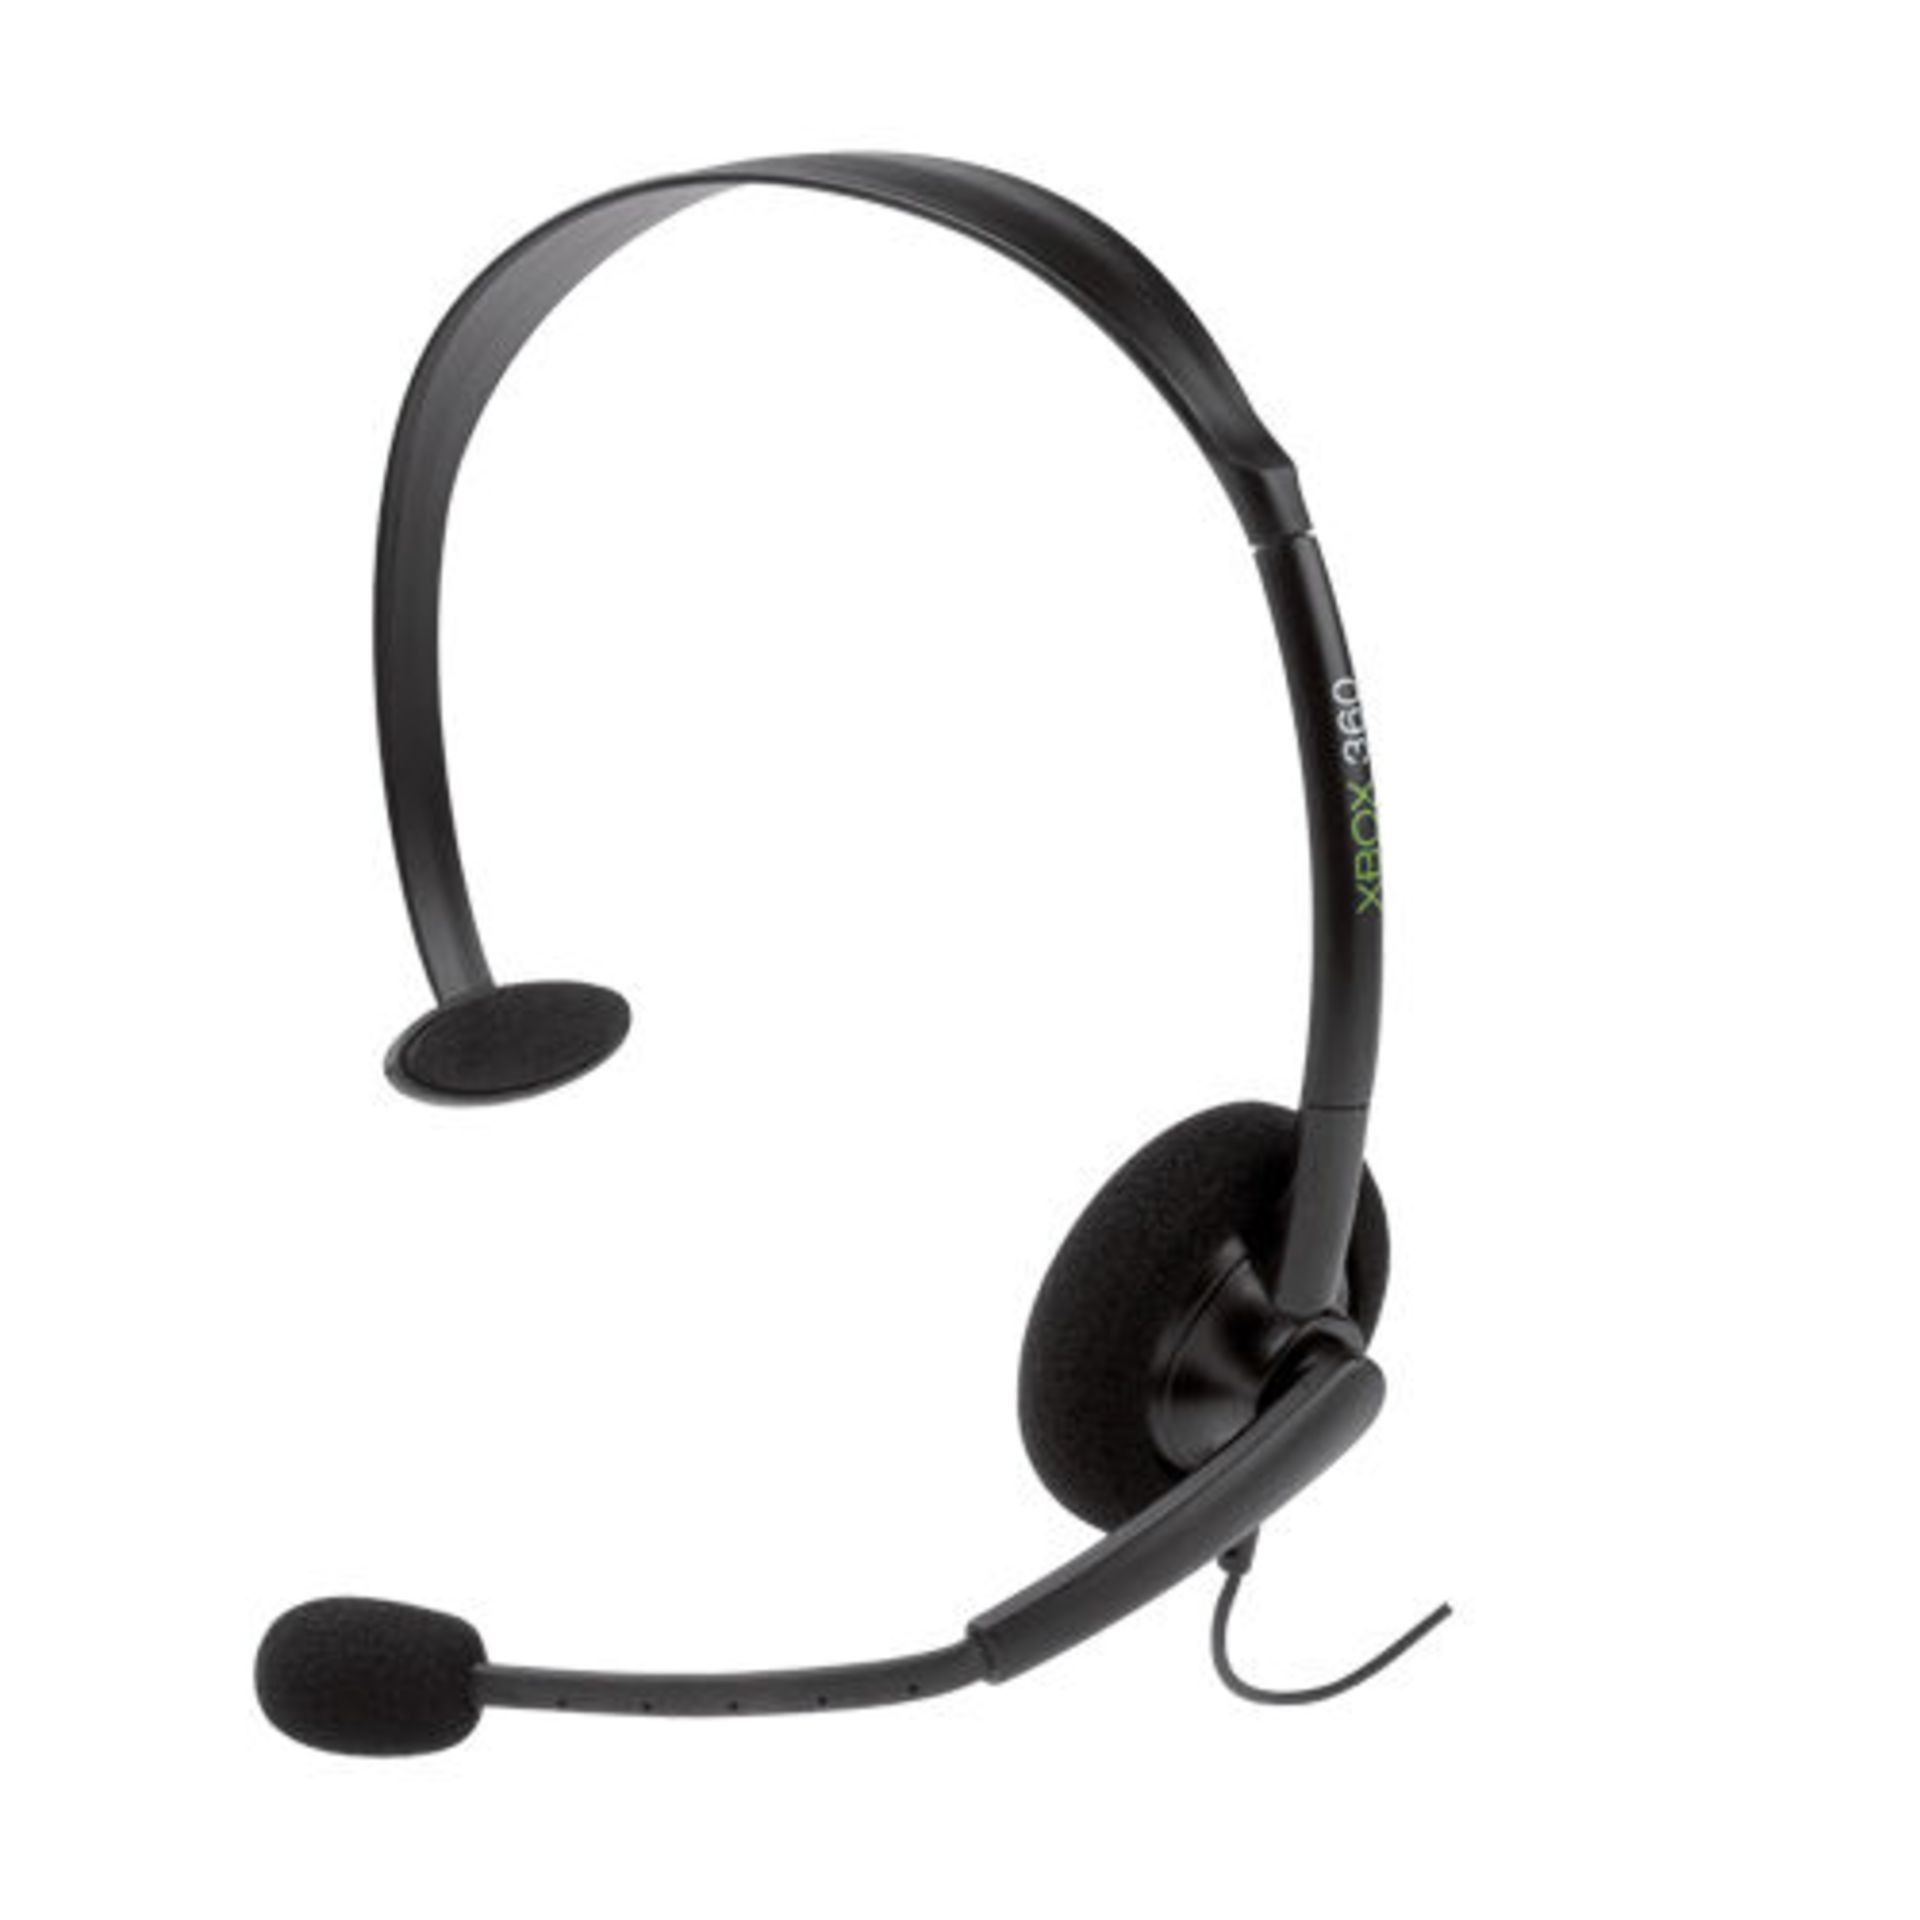 JOBLOT 100 X NEW OFFICIAL XBOX 360 LIVE ONLINE CHAT HEADSET WITH MIC GAMING HEADPHONES 2.5MM AUX - Image 6 of 6